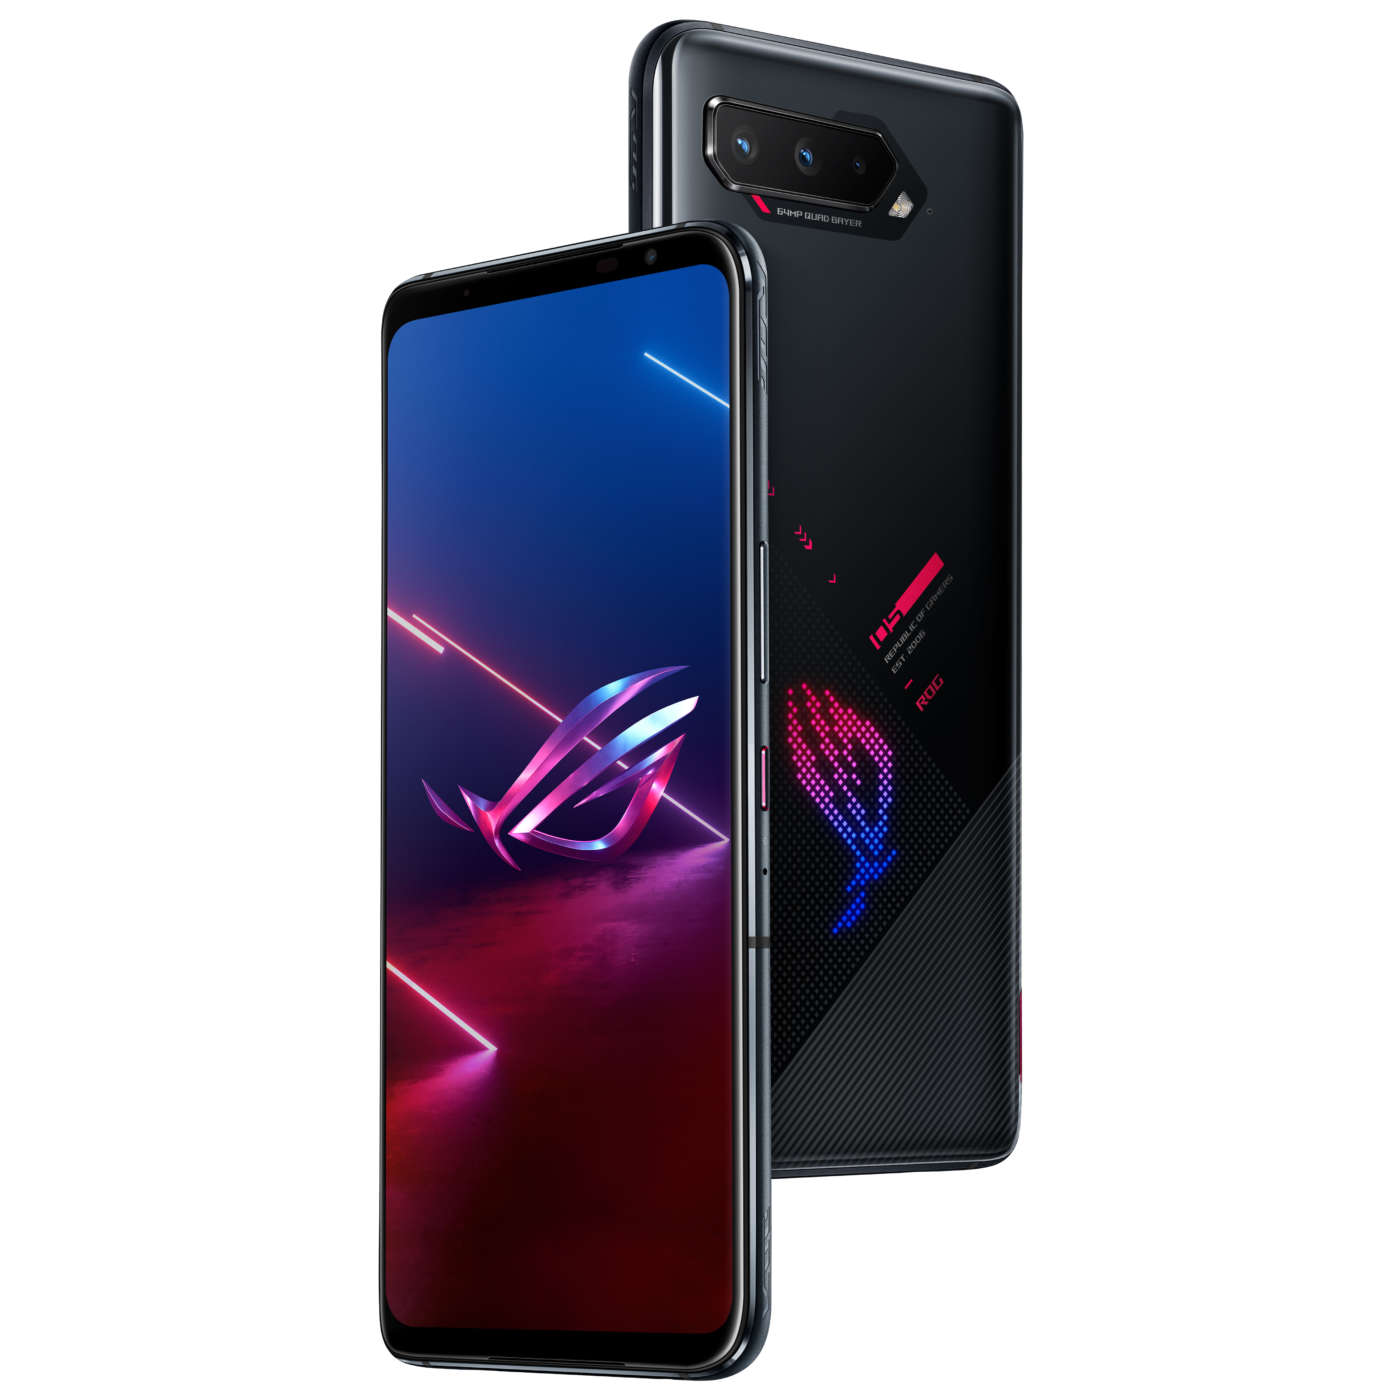 Rog Gaming Phone 5s e 5s Pro